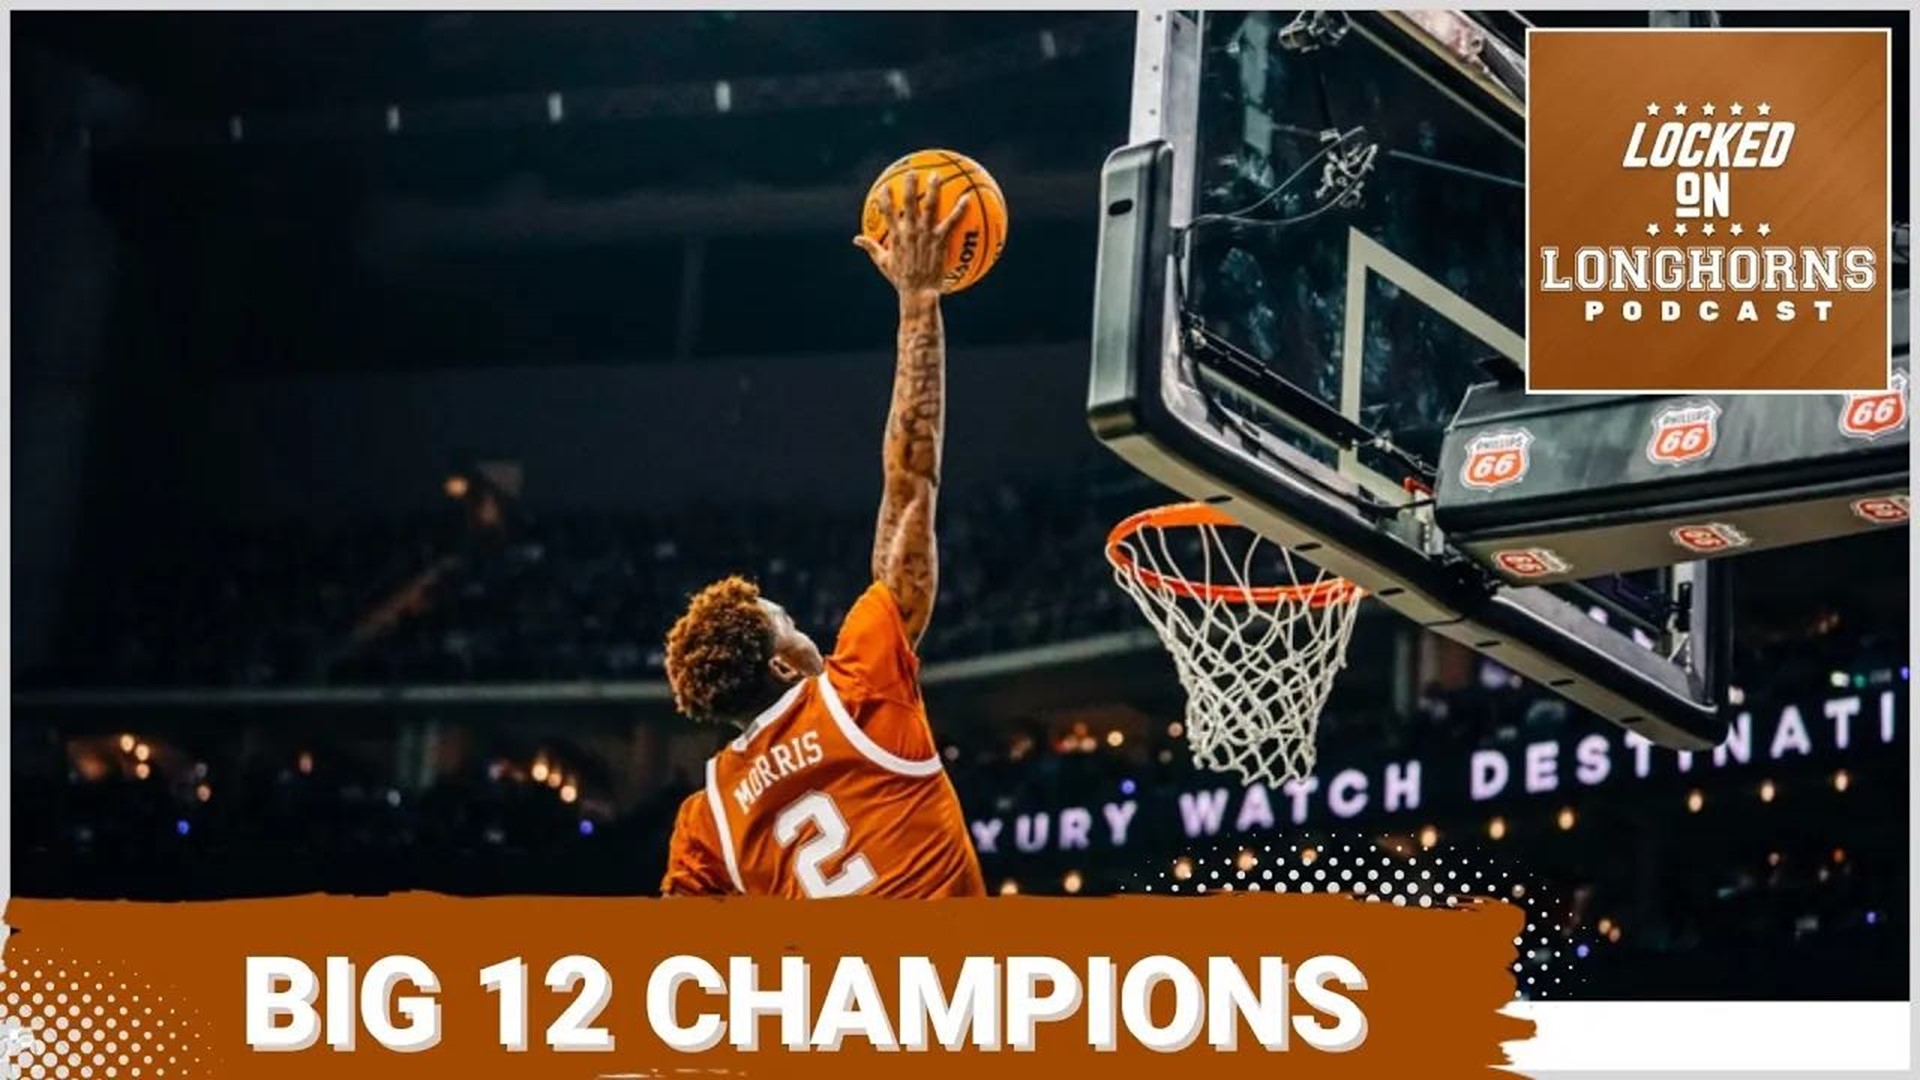 The Texas Men's Basketball Team has achieved success recent years and has a chance to expand on it when the NCAA tournament kicks off on Thursday.